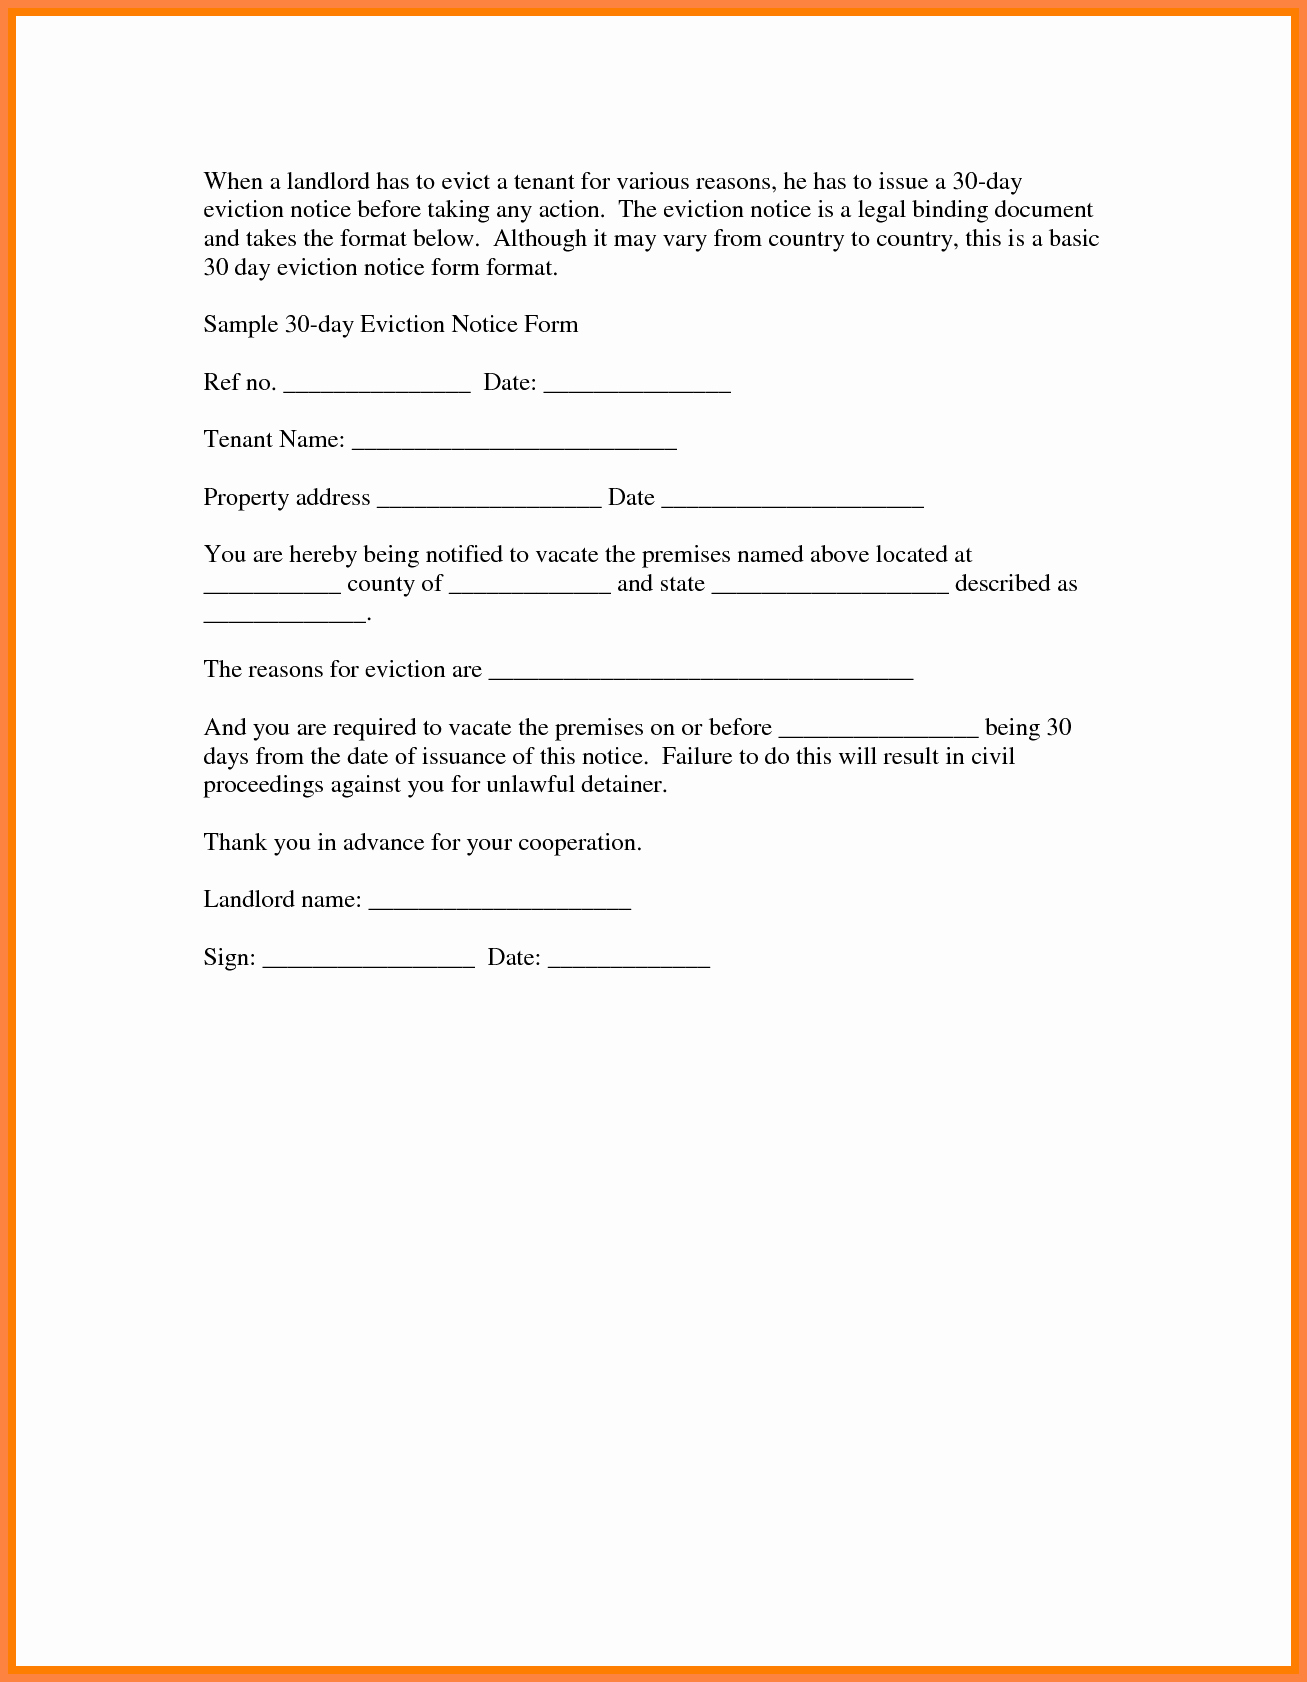 30 Day Eviction Notice Template Fresh 6 30 Day Eviction Notice Pdf